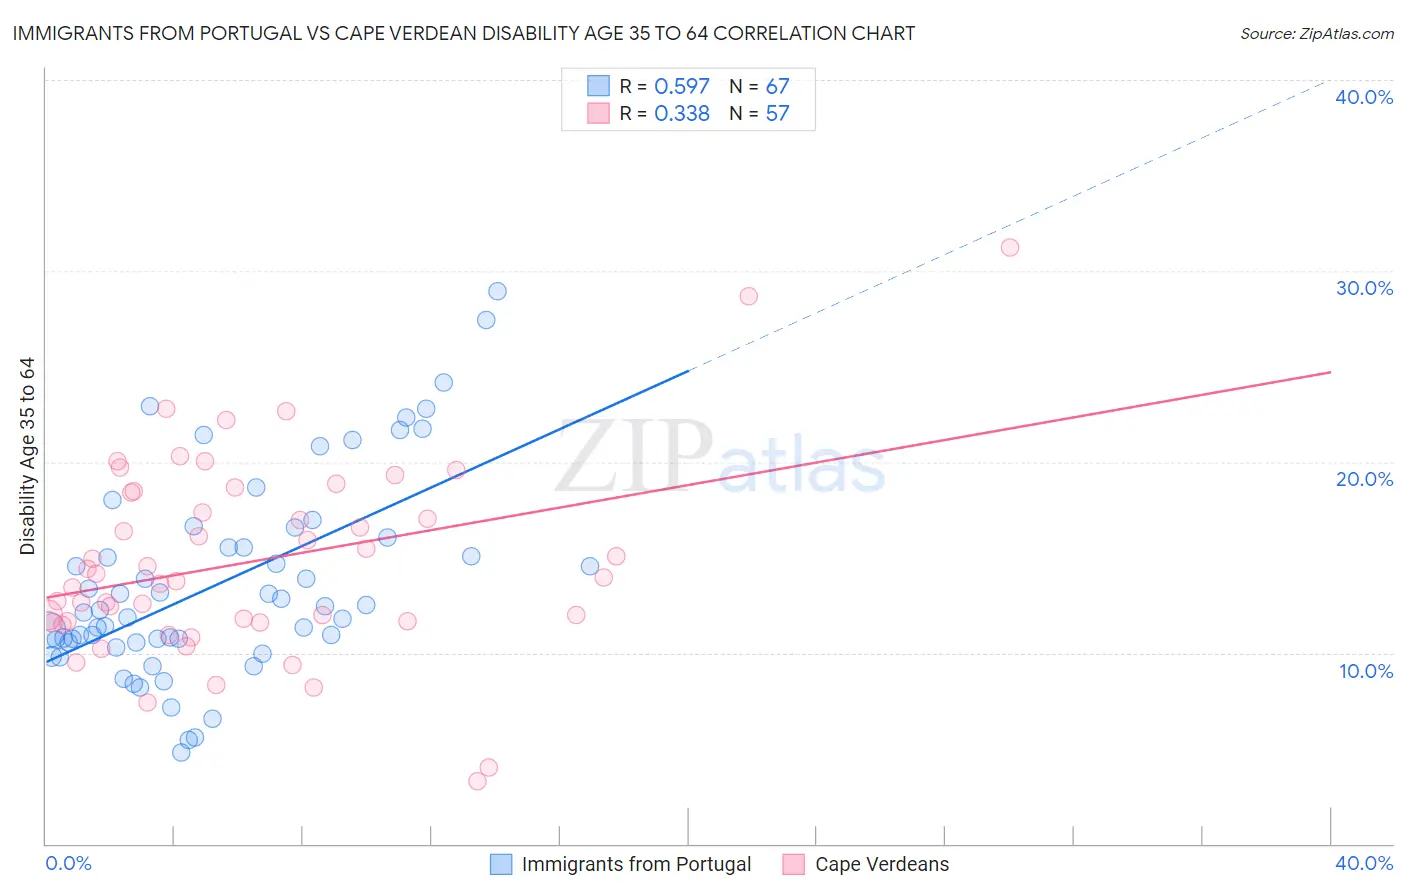 Immigrants from Portugal vs Cape Verdean Disability Age 35 to 64